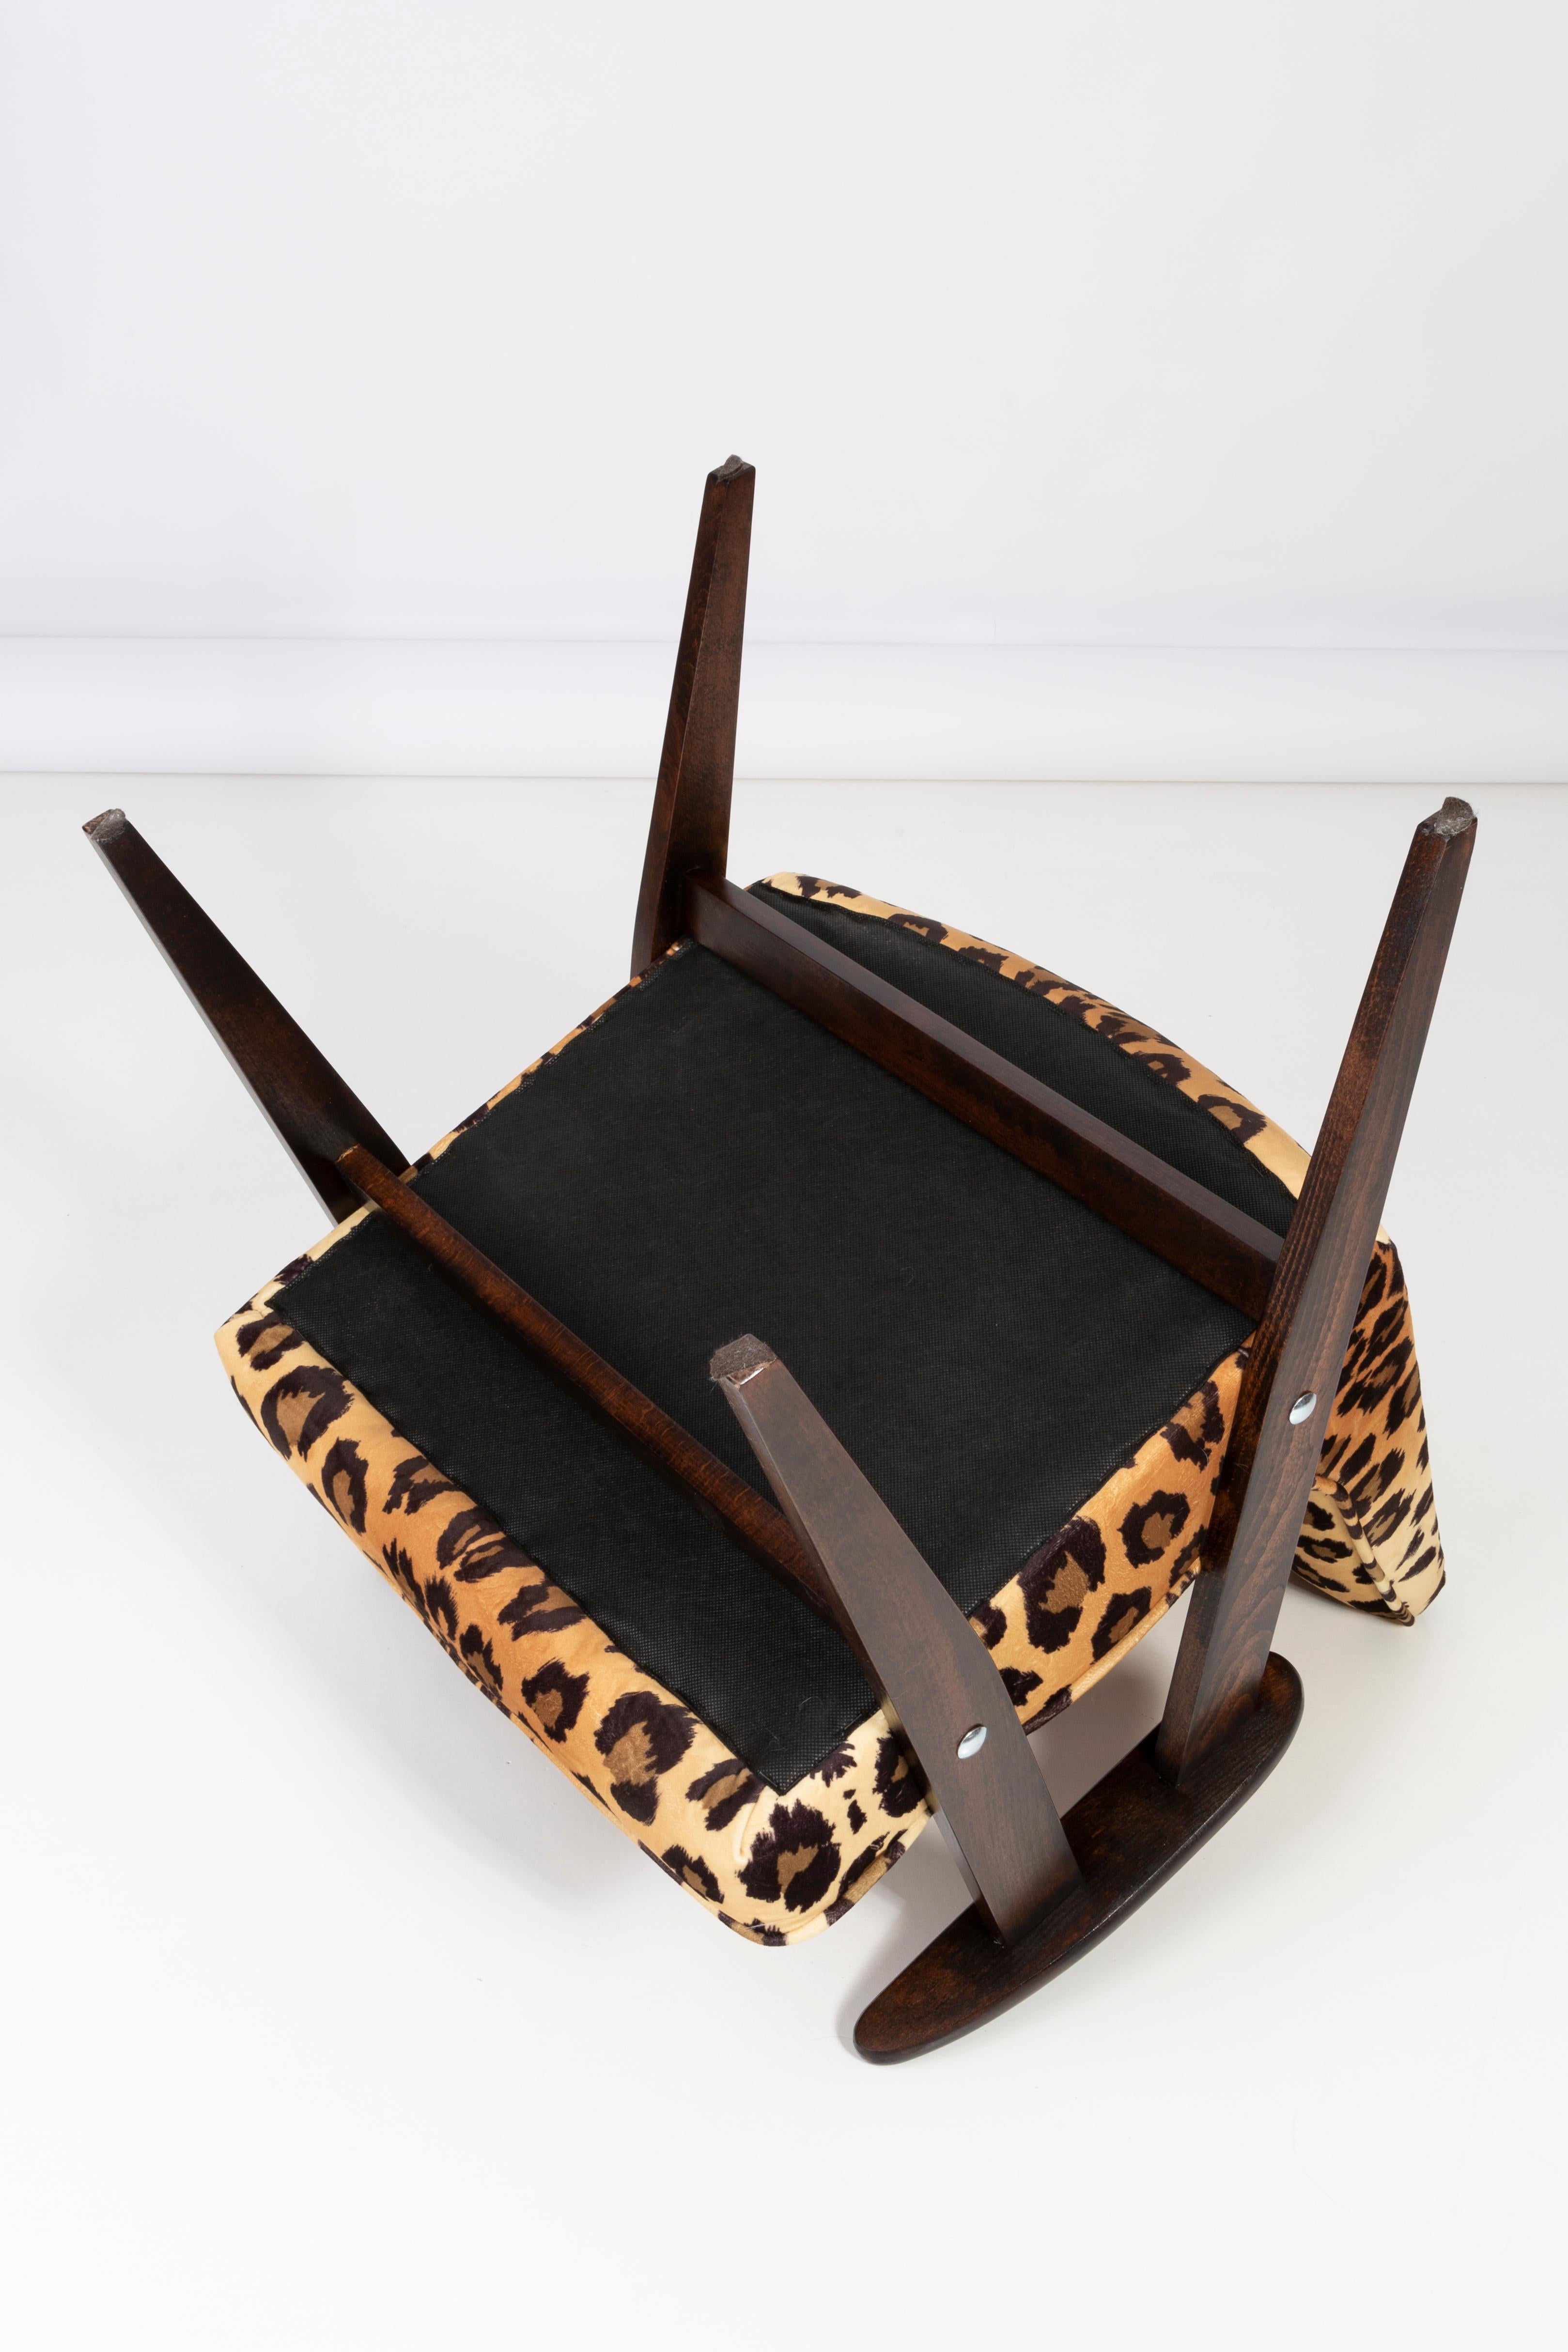 Four Midcentury 366 Armchairs in Leopard Print Velvet, Jozef Chierowski, 1960s For Sale 4